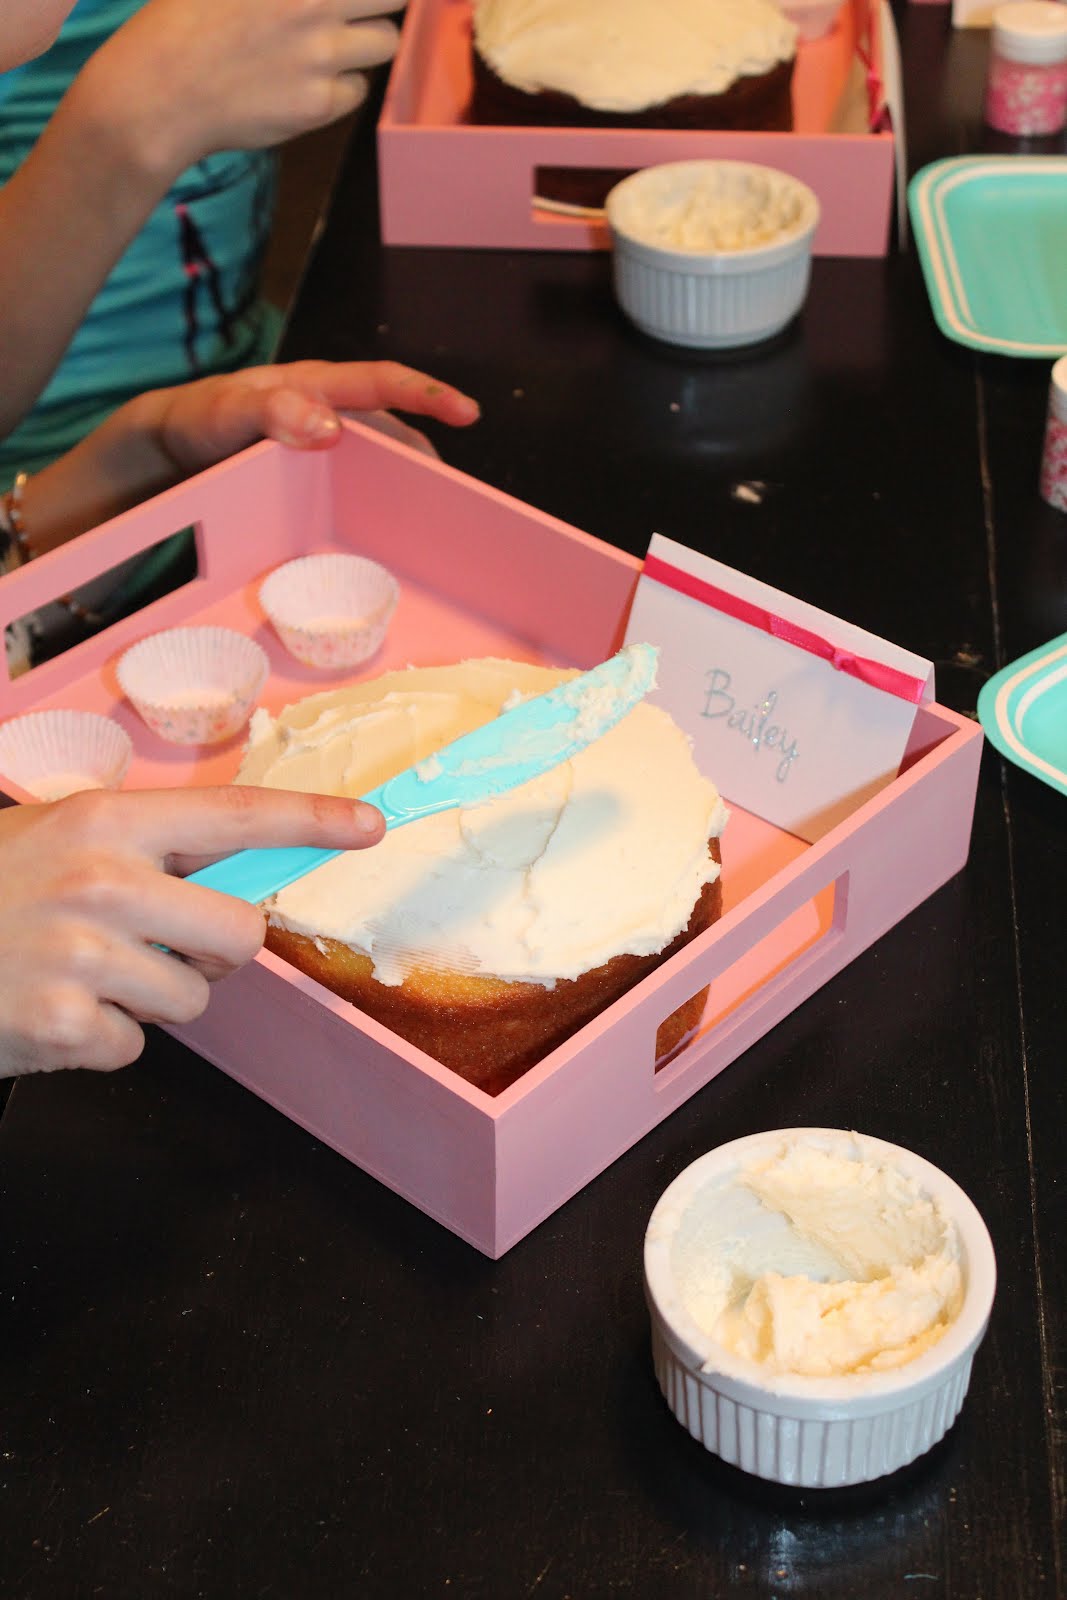 Icing Designs: "Sweet Sleepover" 11th Birthday Party